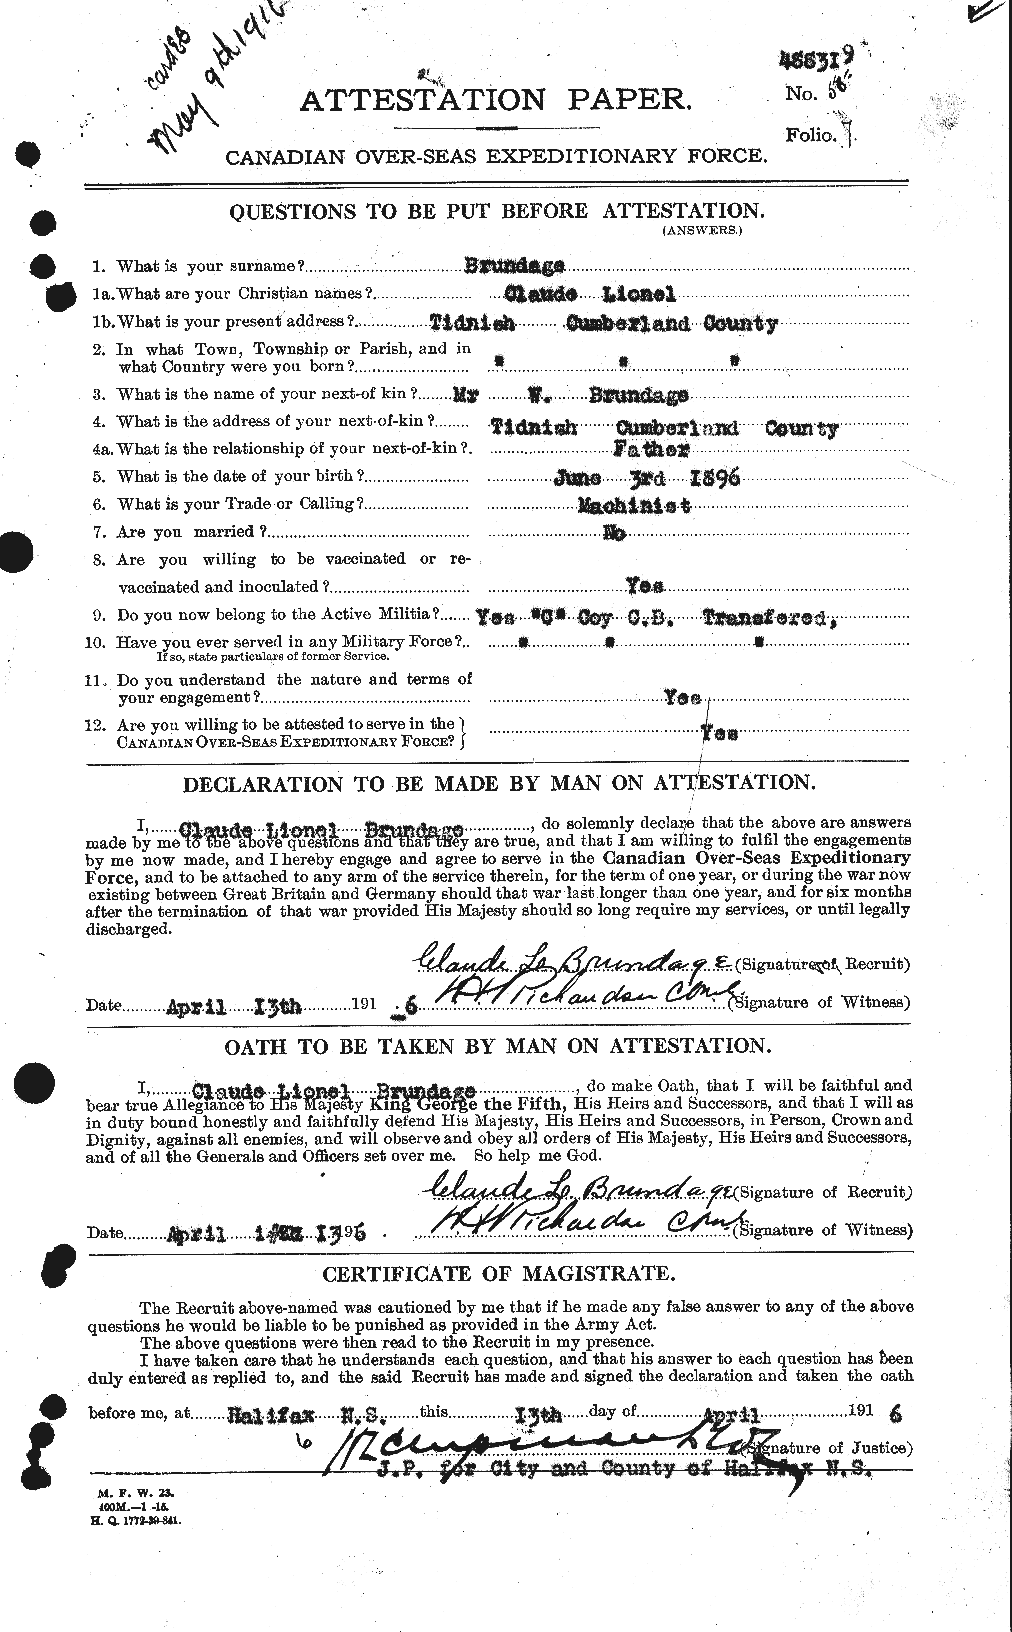 Personnel Records of the First World War - CEF 267937a